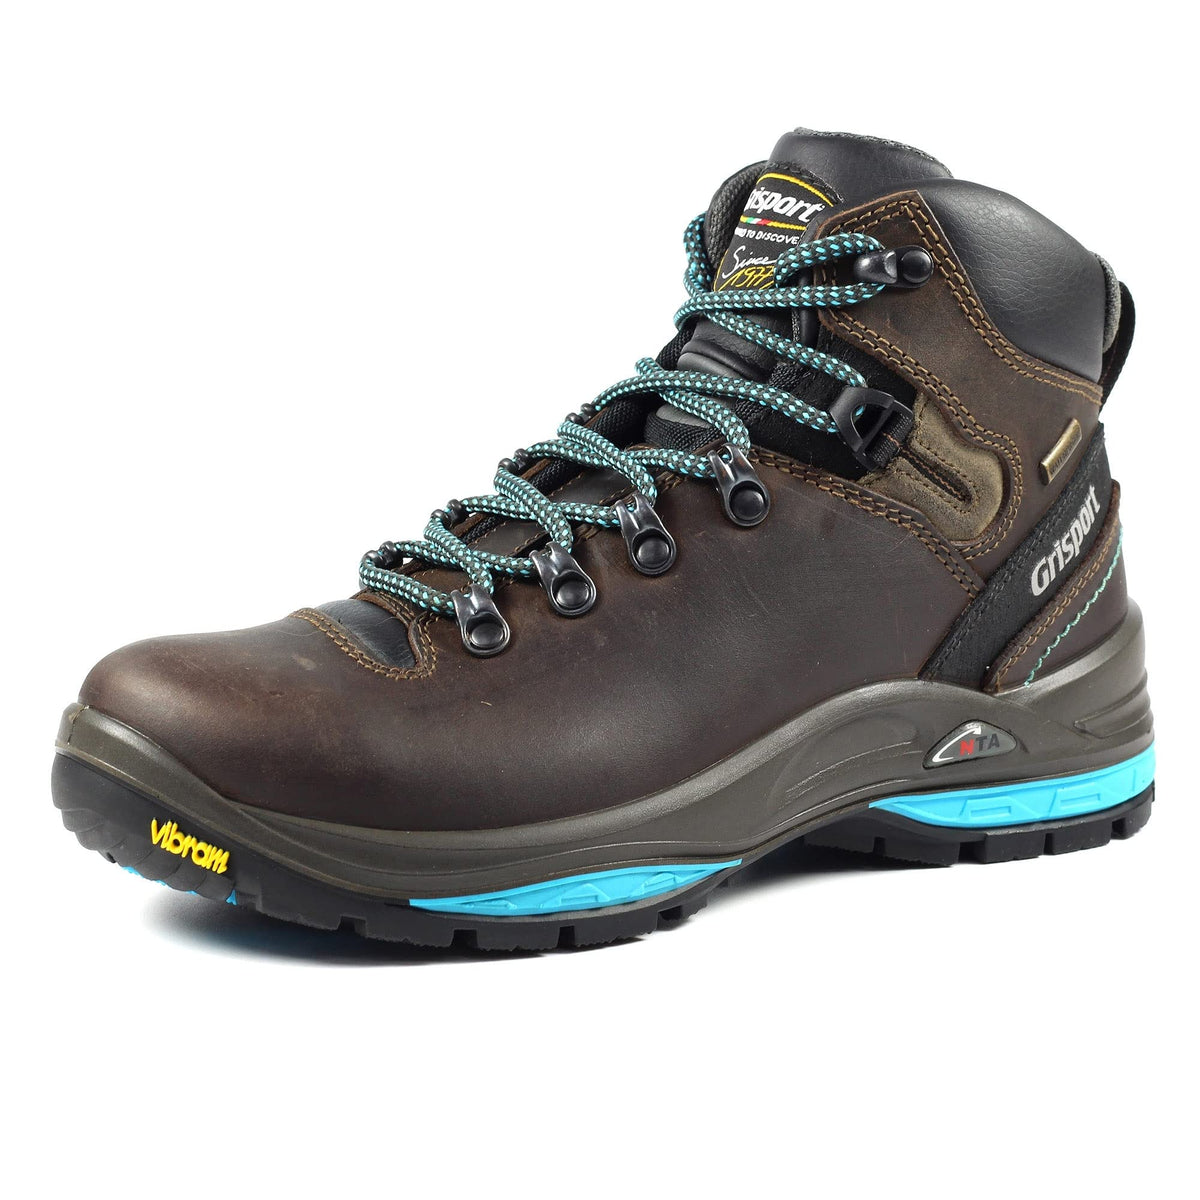 Grisport Lady Glide High Rise Hiking Boots, Brown, 3 UK